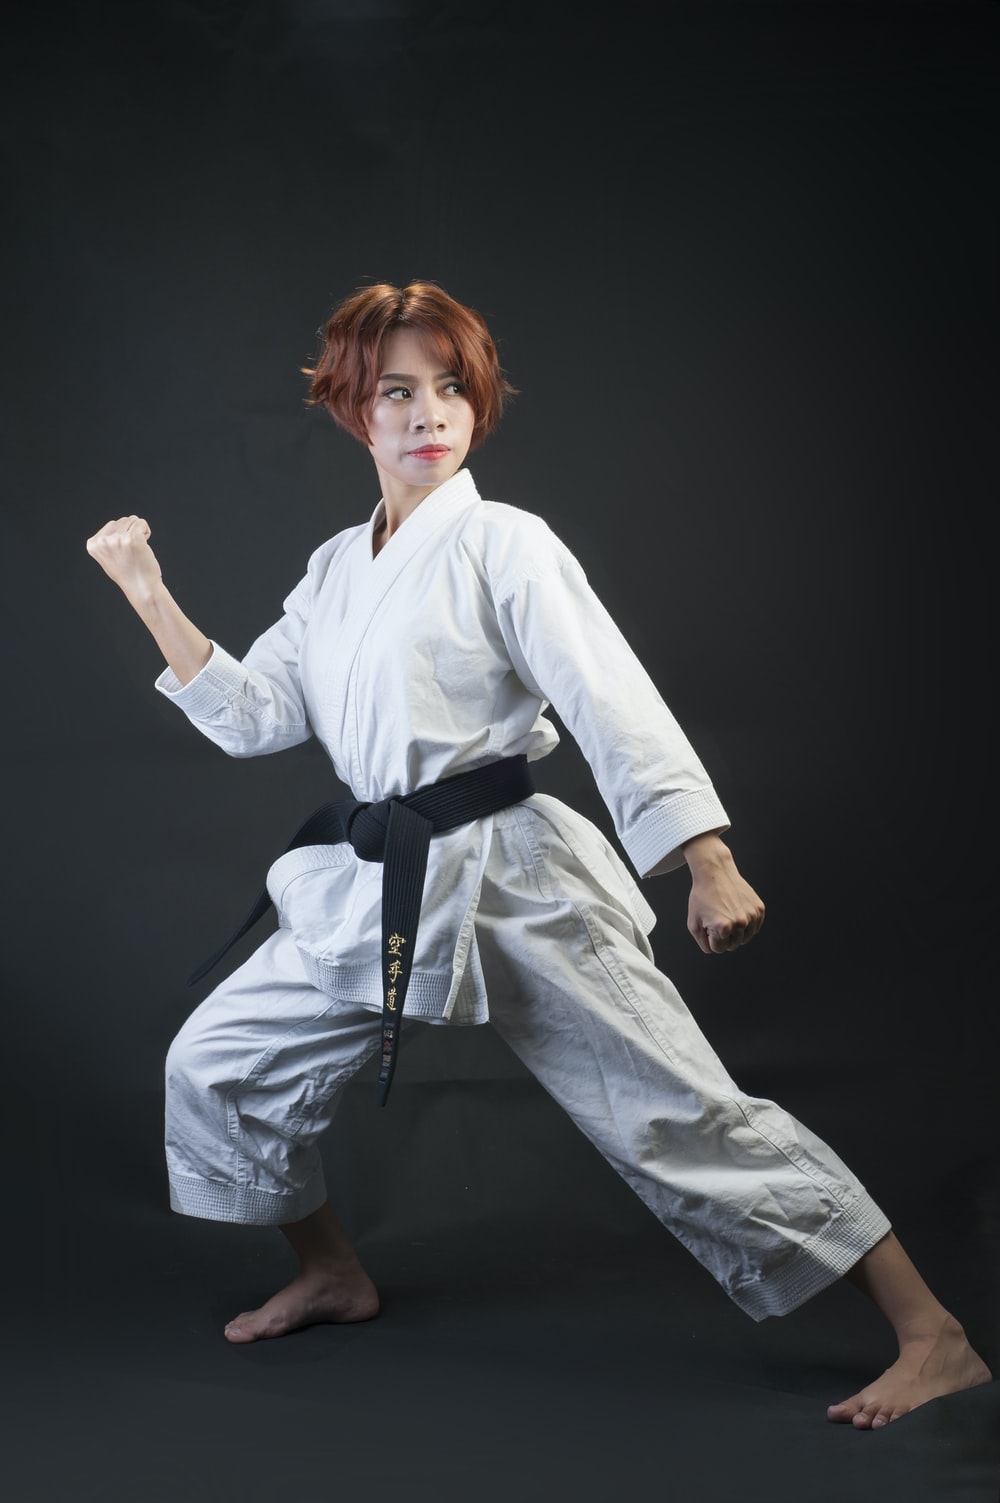 Martial Arts best free martial art, sport, human and karate photo